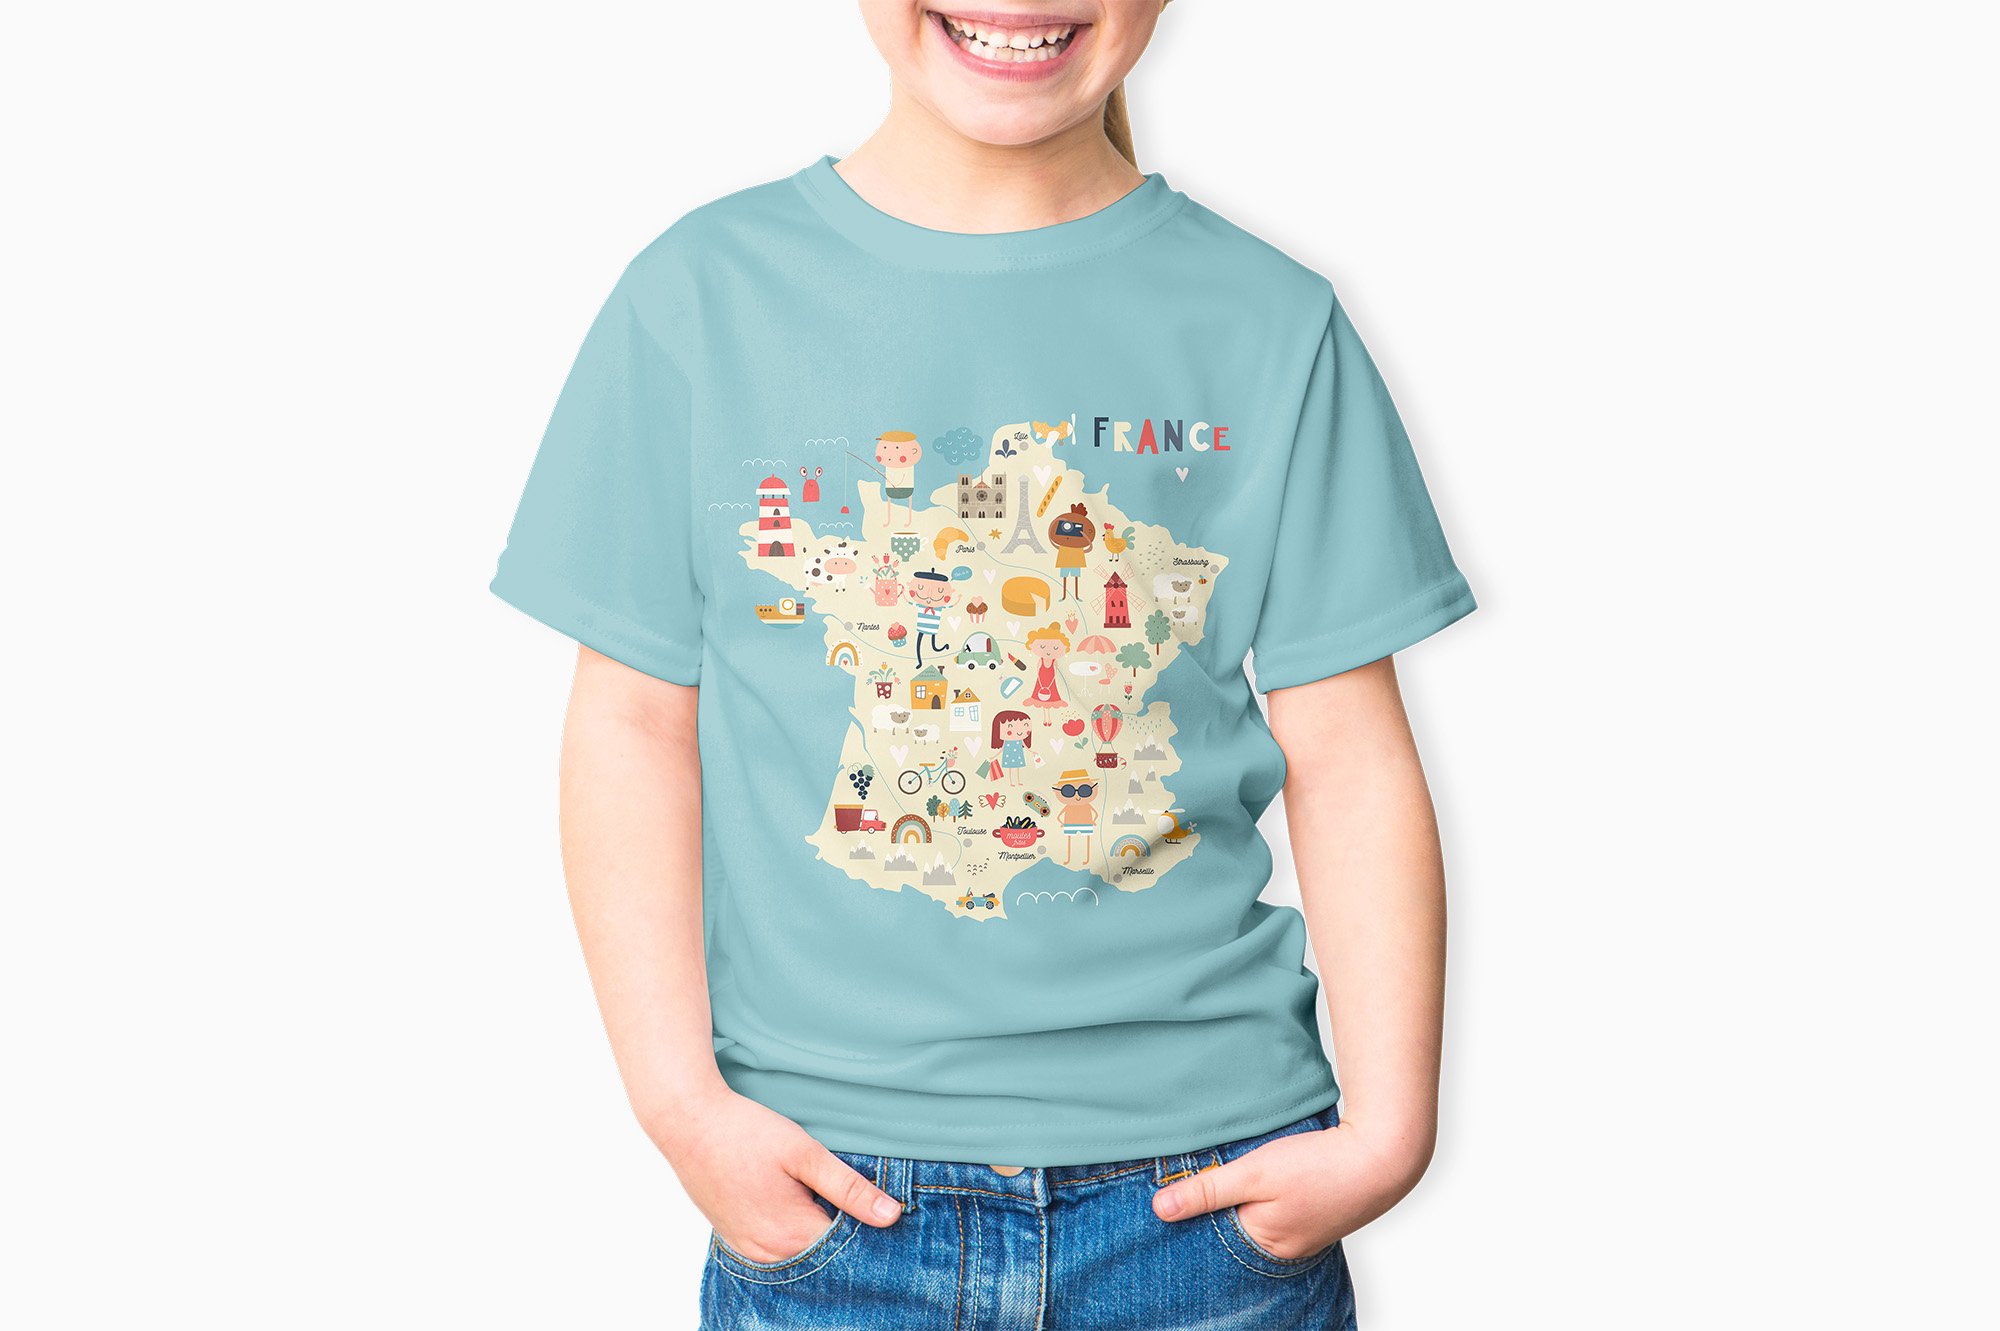 Blue boy's t-shirt with France map.